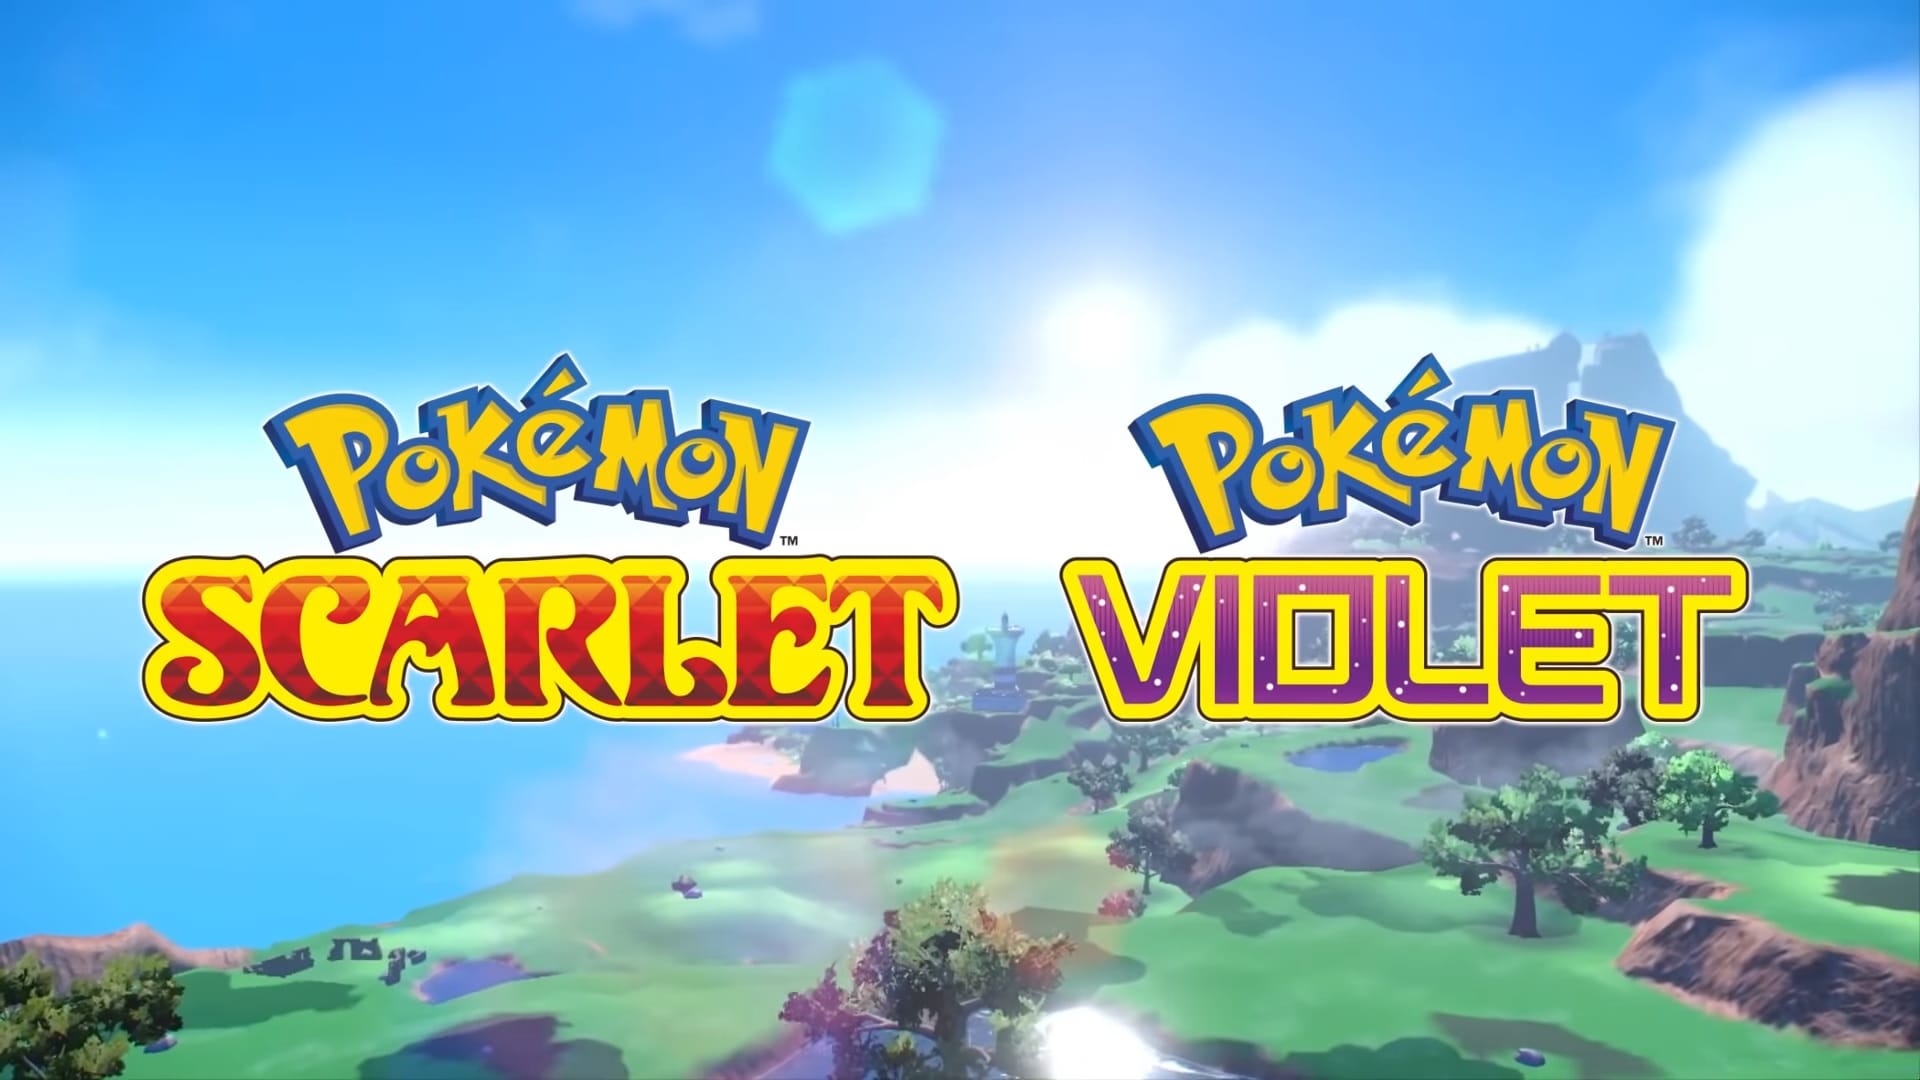 Pokemon Scarlet & Violet - 18th Nov 2022! **OFFICIAL INFO ONLY**, Page 23